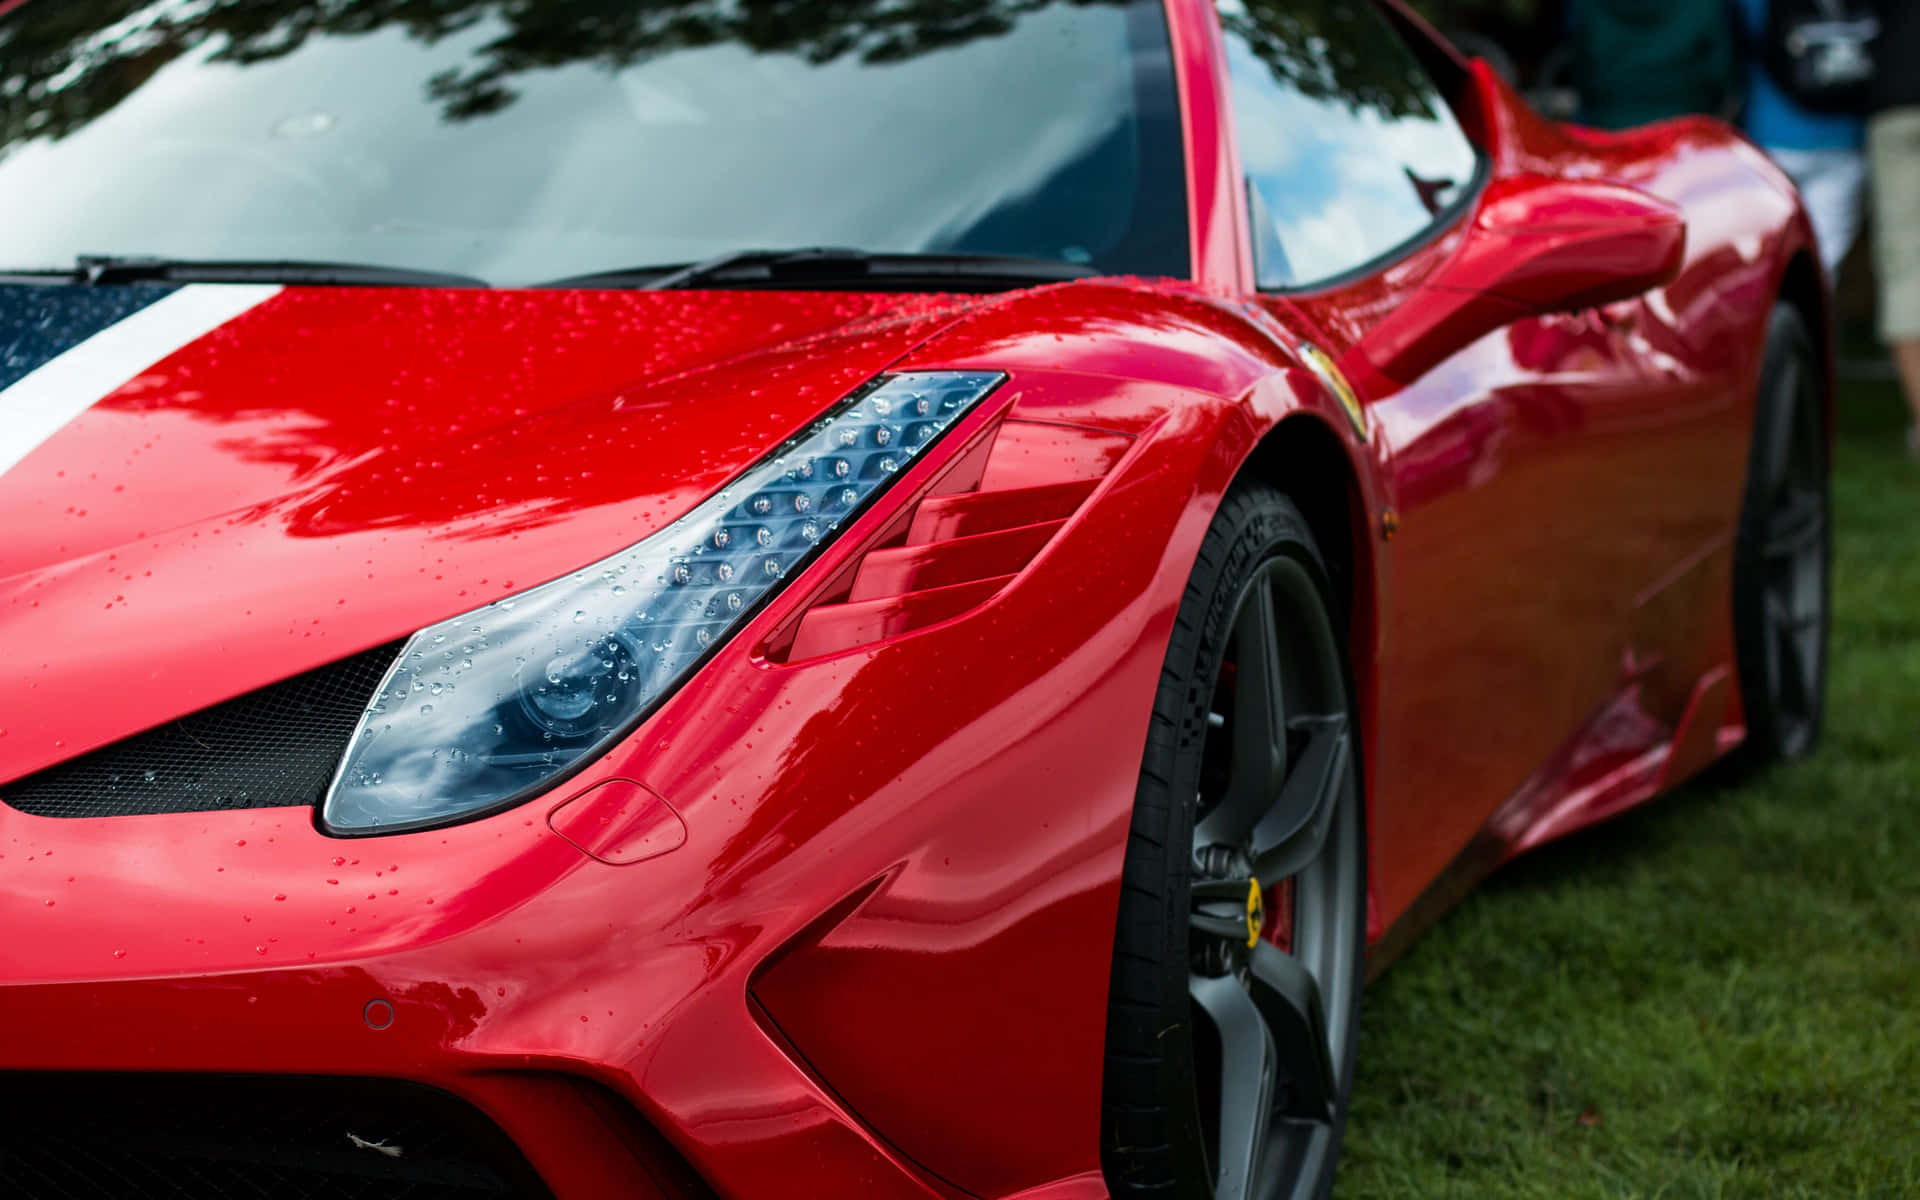 Stunning Red Ferrari 458 Speciale in Action Wallpaper